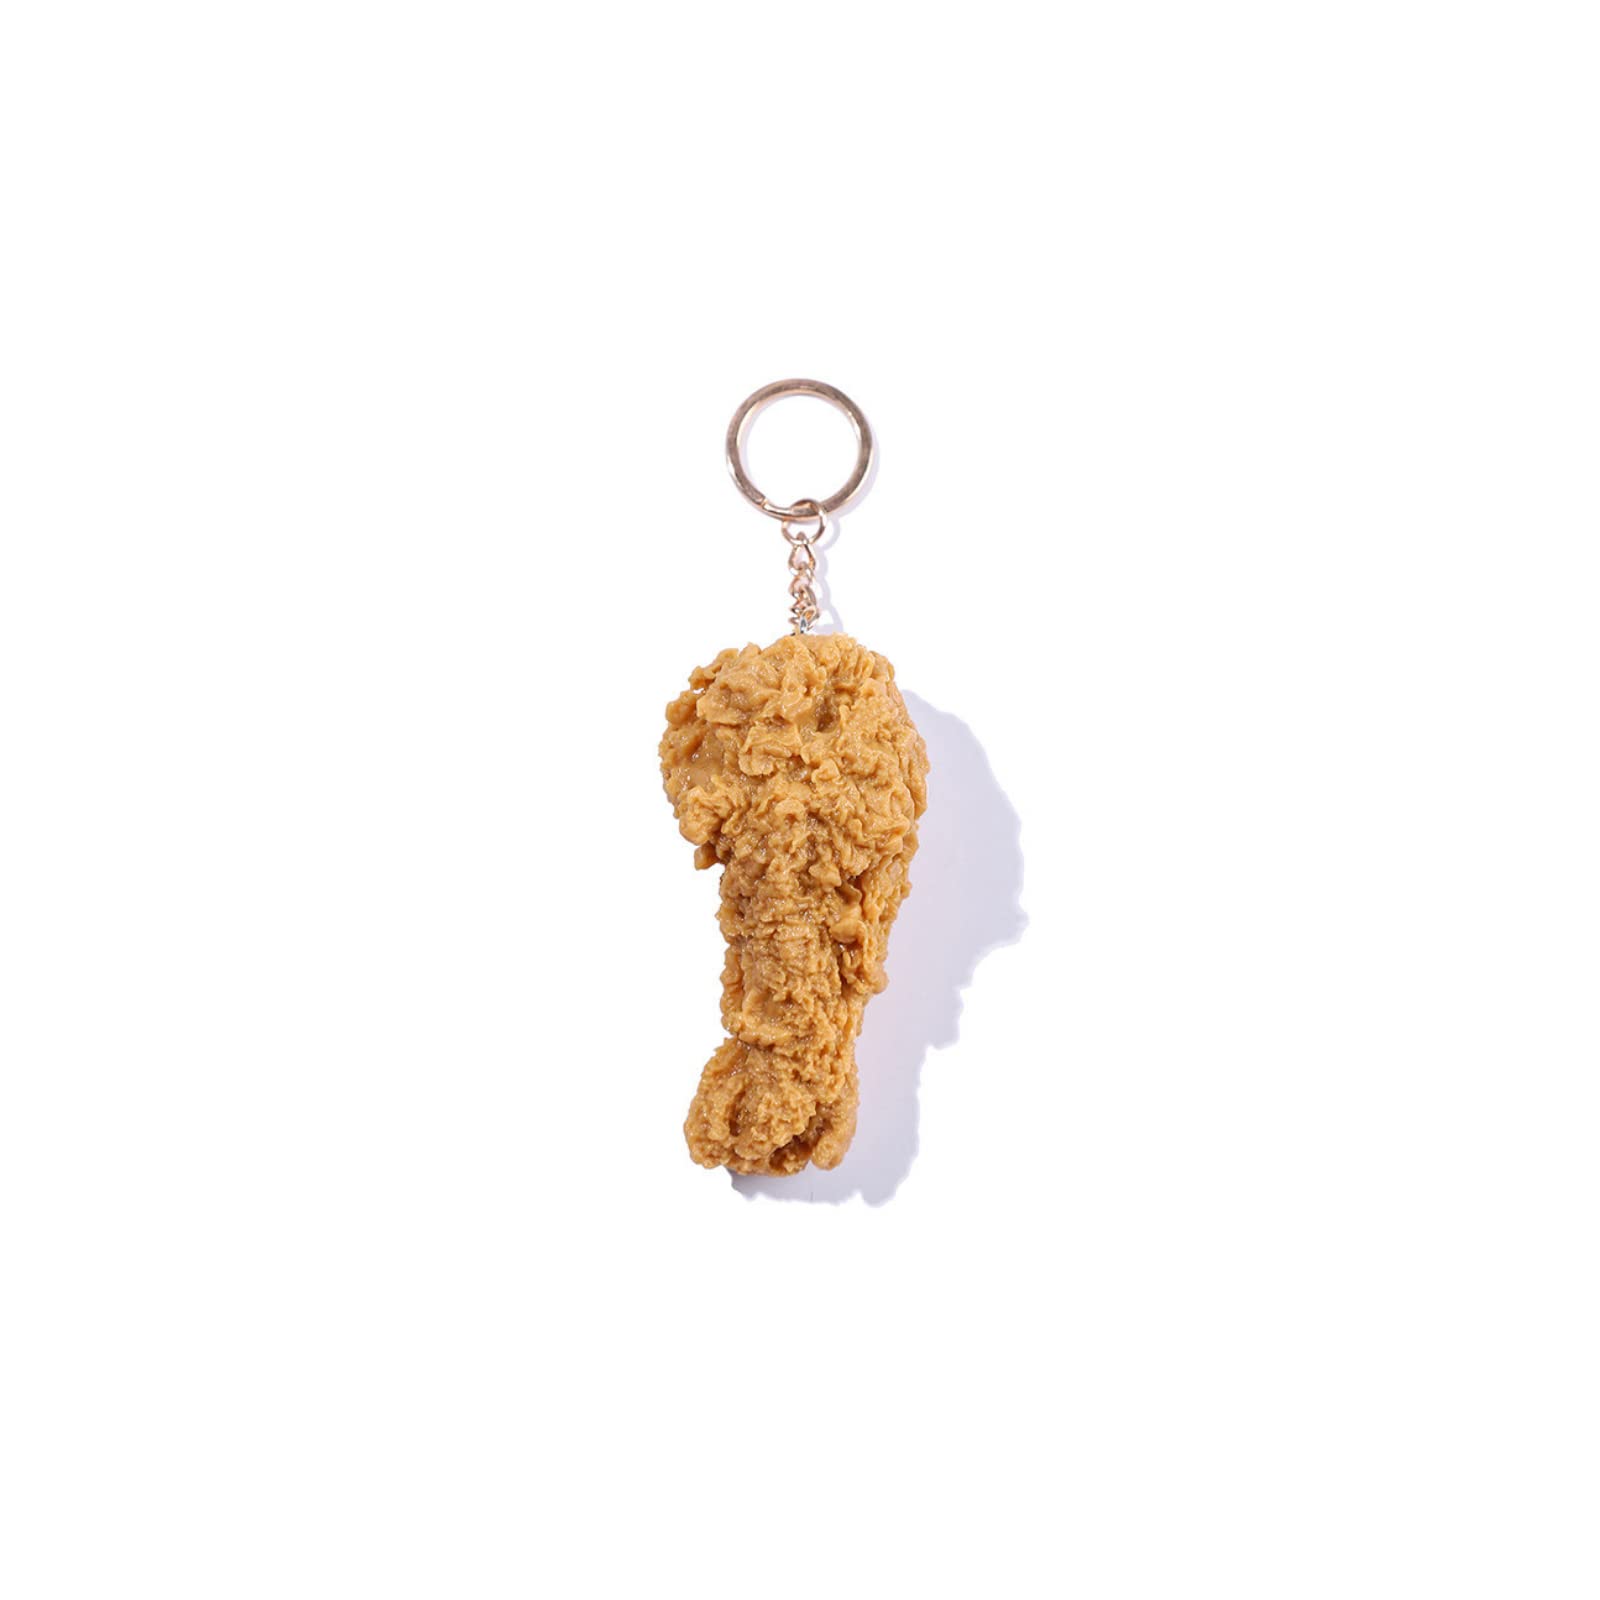 COLORFUL BLING Imitation Fried Chicken Nuggets Keychain Chicken Leg Wing Creative Keyring Funny Accessories for Backpack, B-Huhn Bein, 1 von COLORFUL BLING